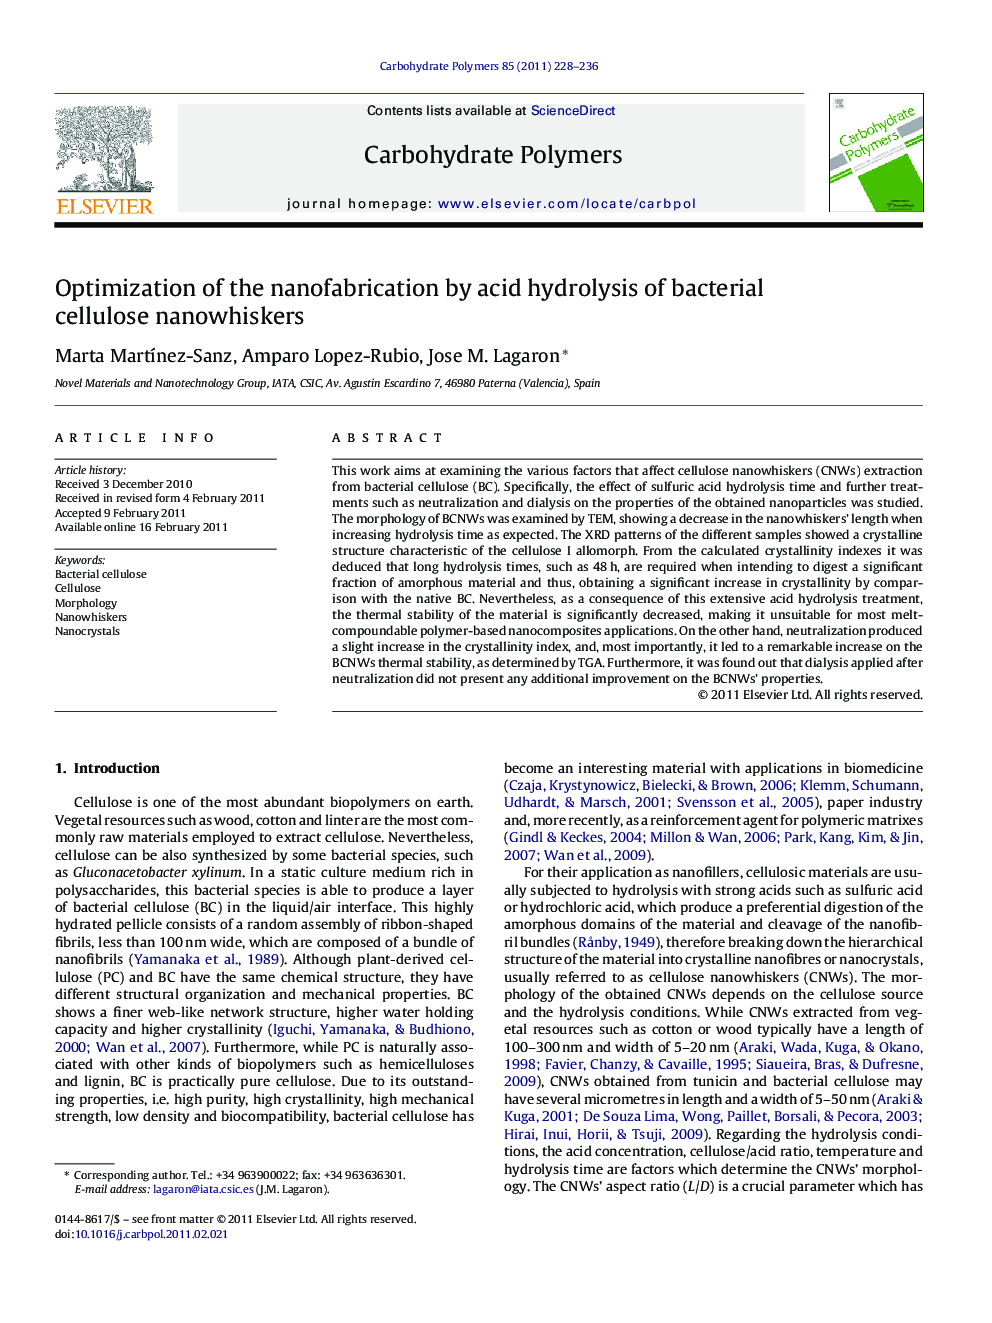 Optimization of the nanofabrication by acid hydrolysis of bacterial cellulose nanowhiskers